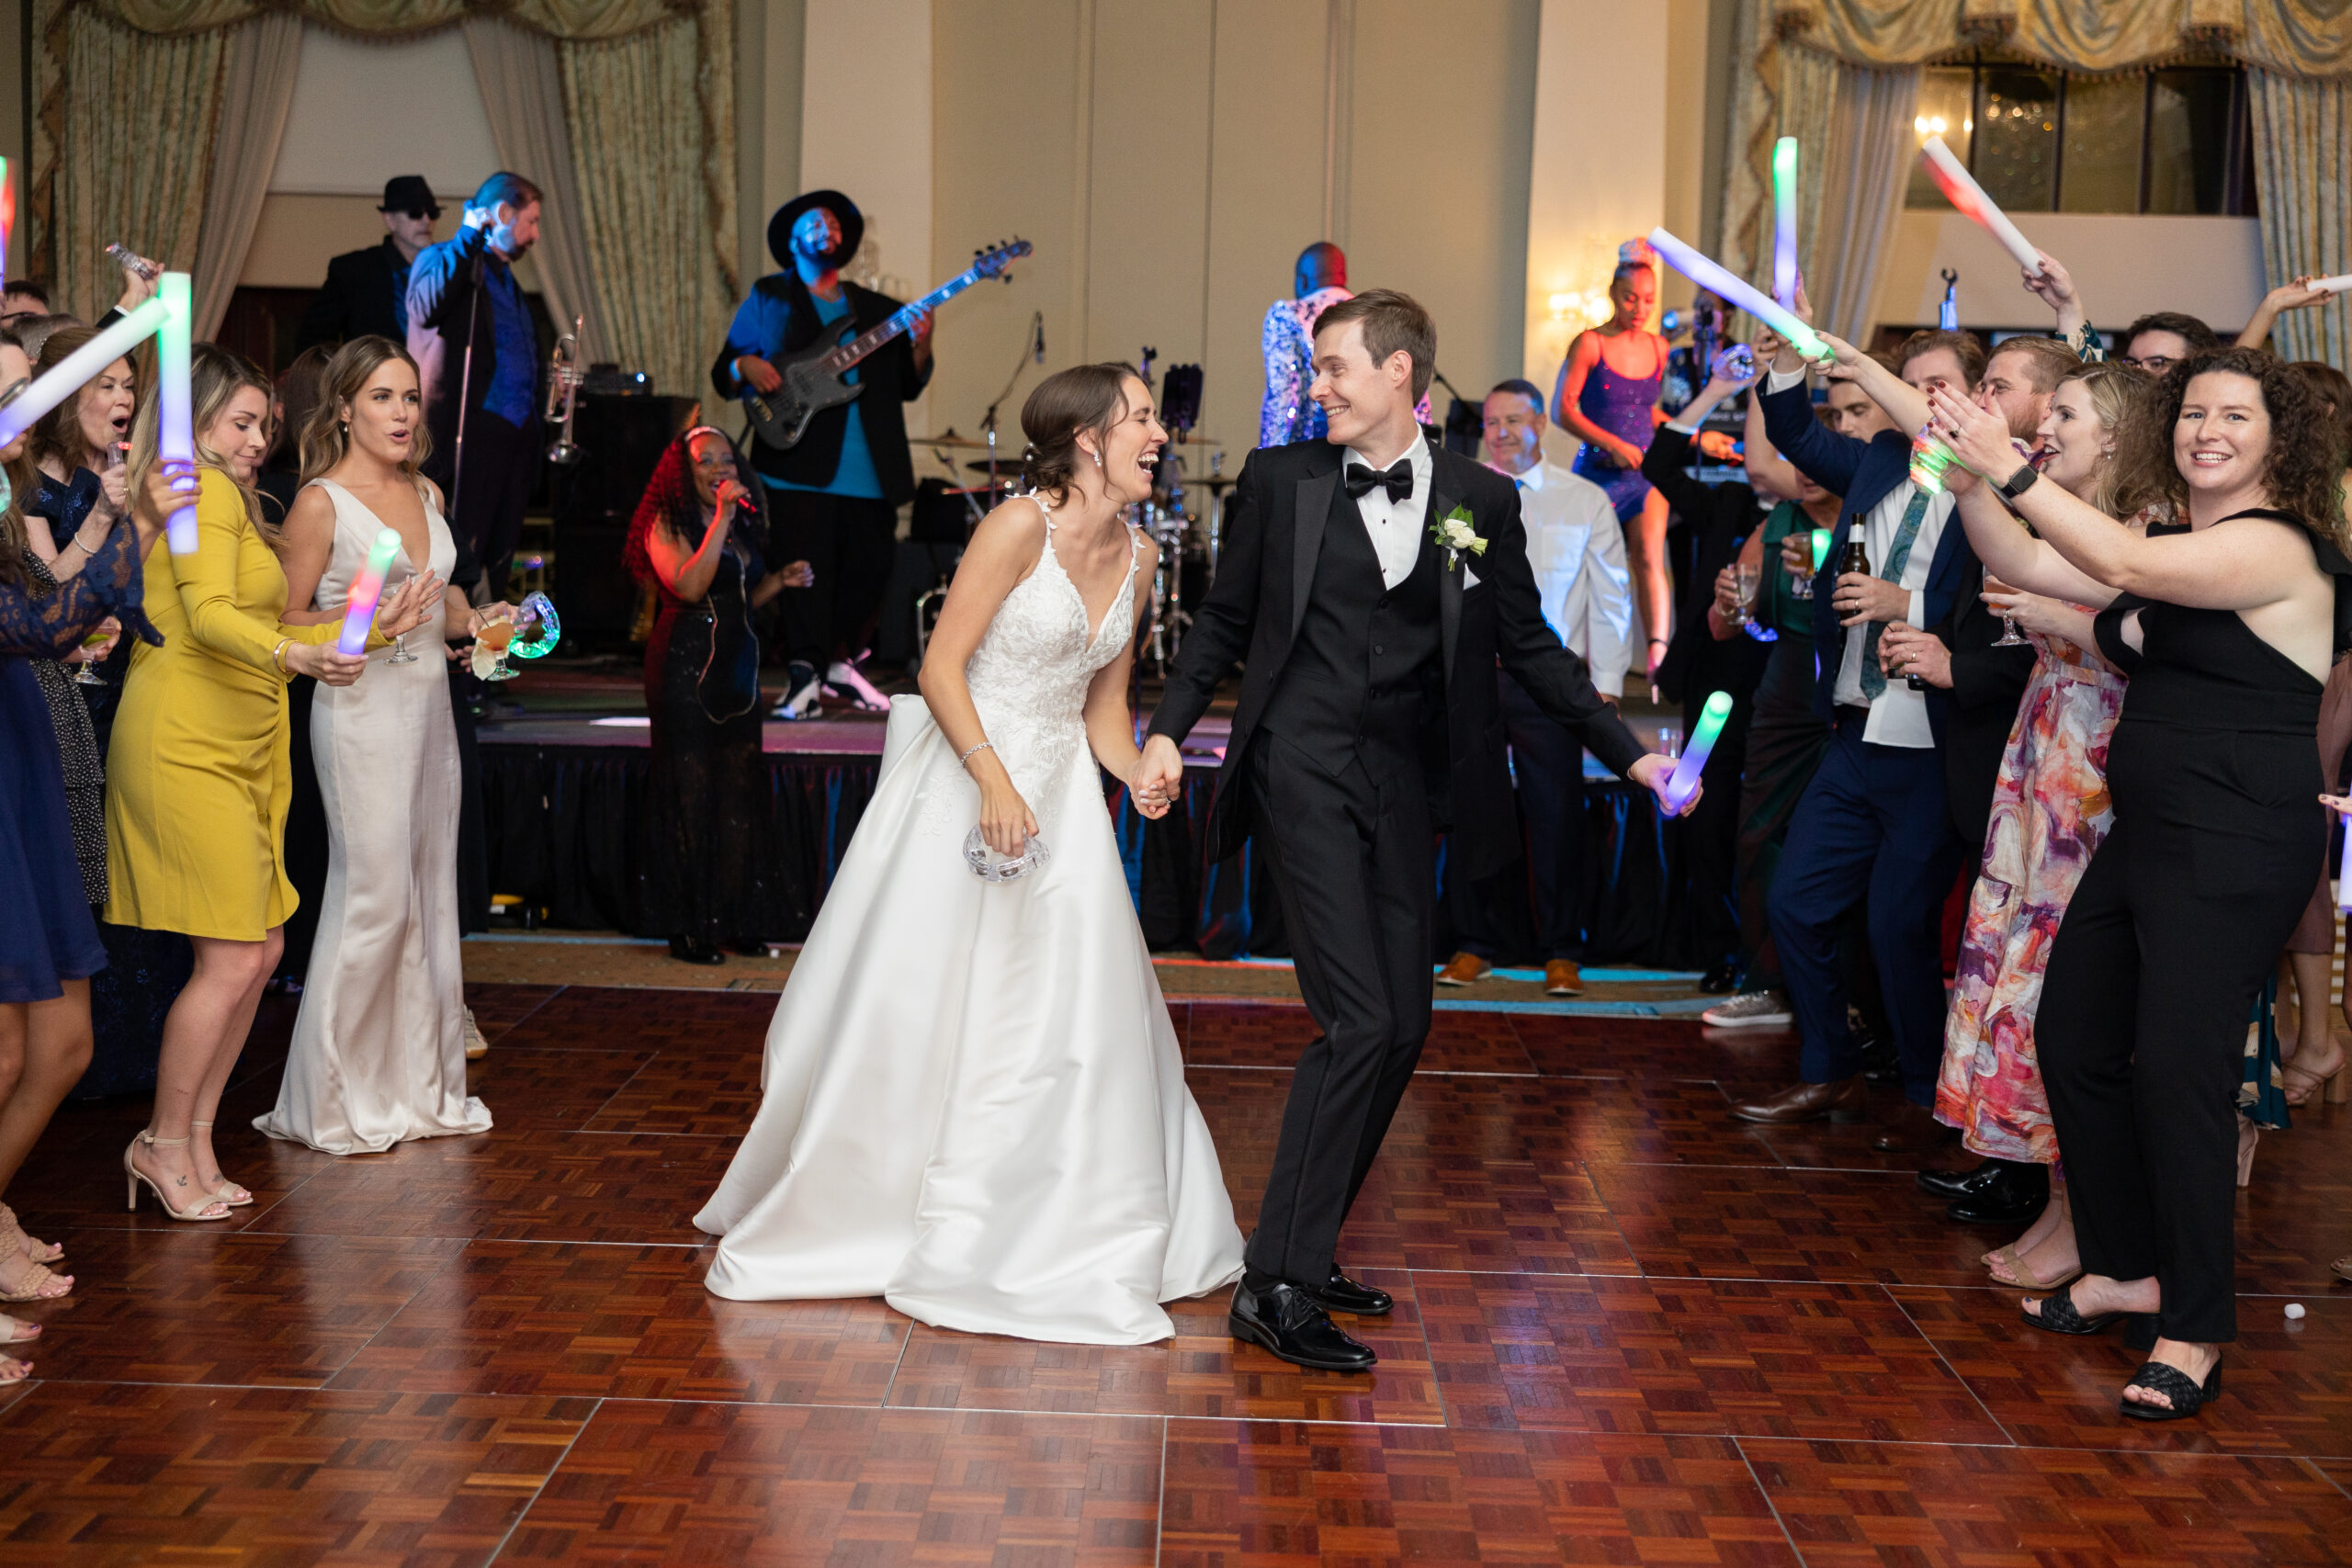 Bride and groom on dance floor laughing and having a great time